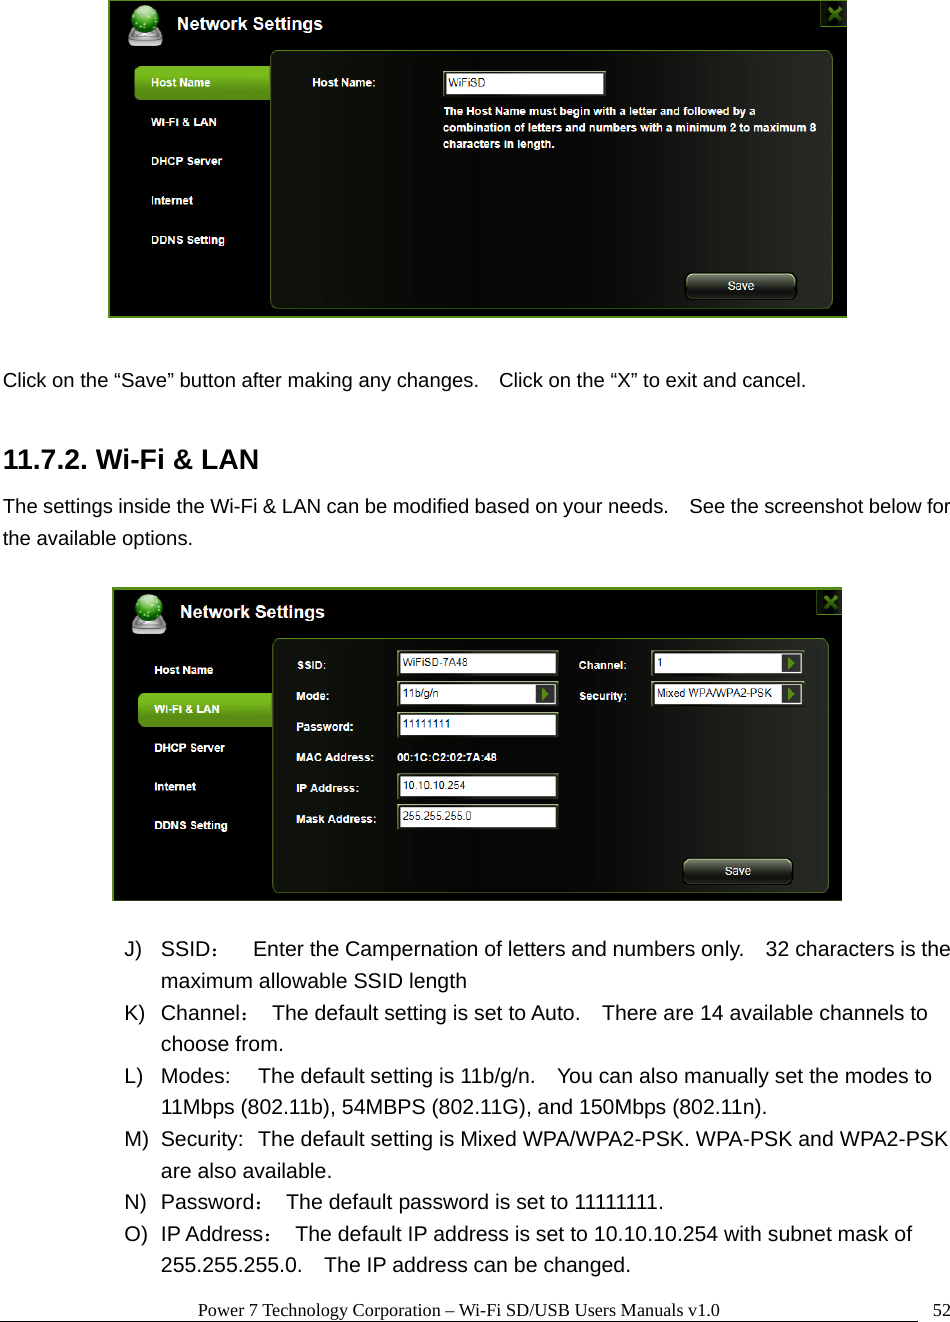 Power 7 Technology Corporation – Wi-Fi SD/USB Users Manuals v1.0  52  Click on the “Save” button after making any changes.    Click on the “X” to exit and cancel.  11.7.2. Wi-Fi &amp; LAN The settings inside the Wi-Fi &amp; LAN can be modified based on your needs.    See the screenshot below for the available options.    J) SSID：    Enter the Campernation of letters and numbers only.    32 characters is the maximum allowable SSID length   K) Channel：  The default setting is set to Auto.    There are 14 available channels to choose from. L)  Modes:  The default setting is 11b/g/n.    You can also manually set the modes to 11Mbps (802.11b), 54MBPS (802.11G), and 150Mbps (802.11n). M)  Security:  The default setting is Mixed WPA/WPA2-PSK. WPA-PSK and WPA2-PSK are also available. N) Password：  The default password is set to 11111111. O) IP Address：  The default IP address is set to 10.10.10.254 with subnet mask of 255.255.255.0.    The IP address can be changed. 